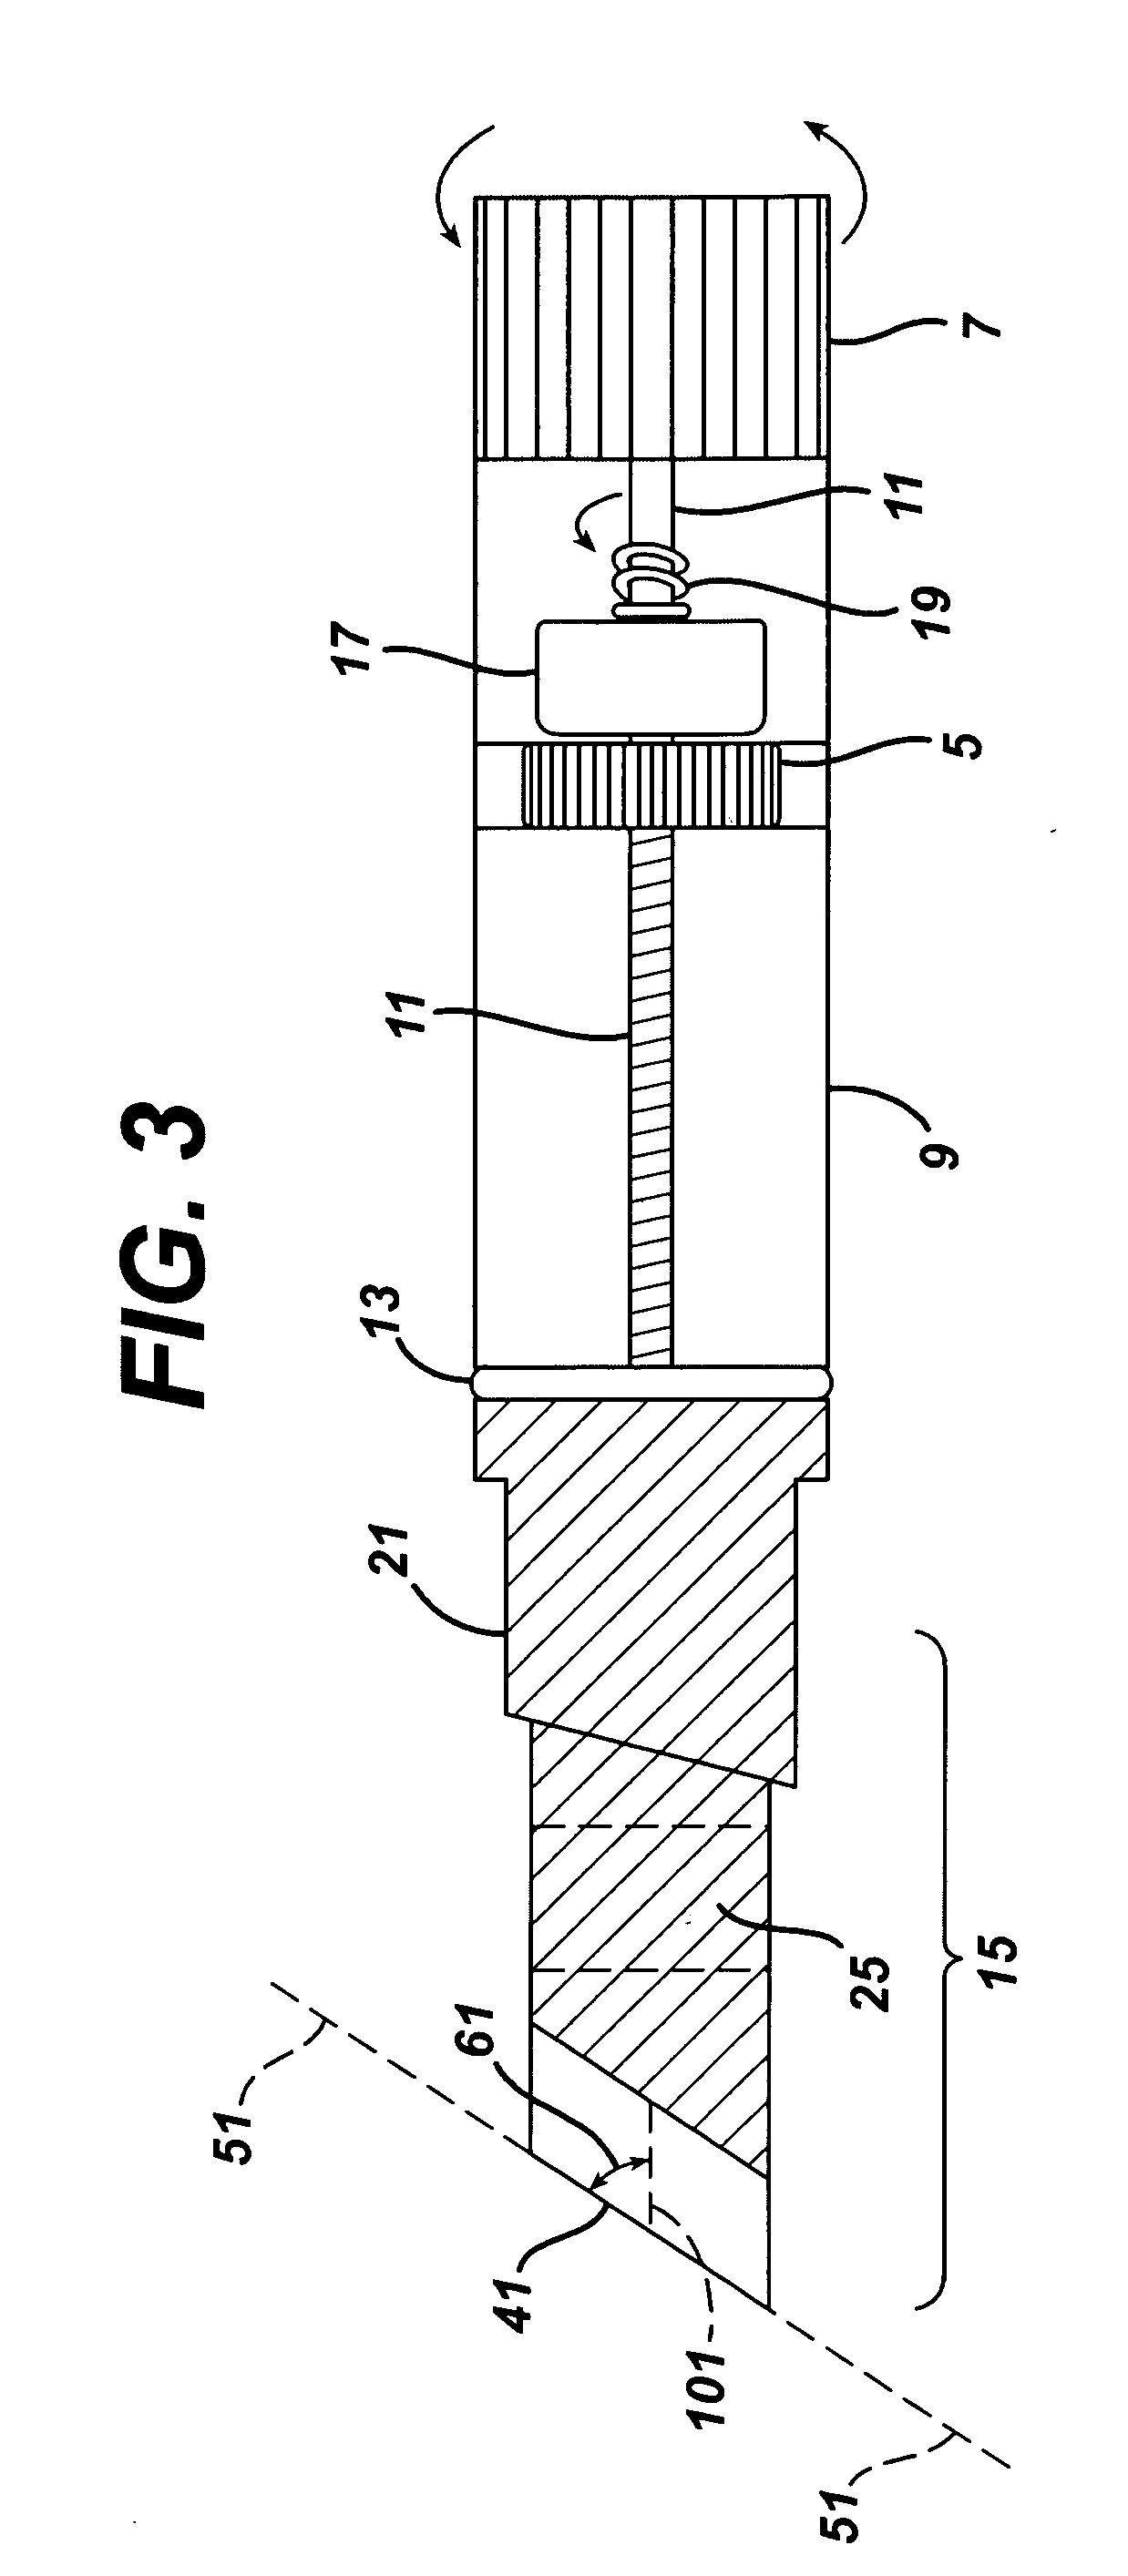 Method of using skin compositions including tensioning polymers